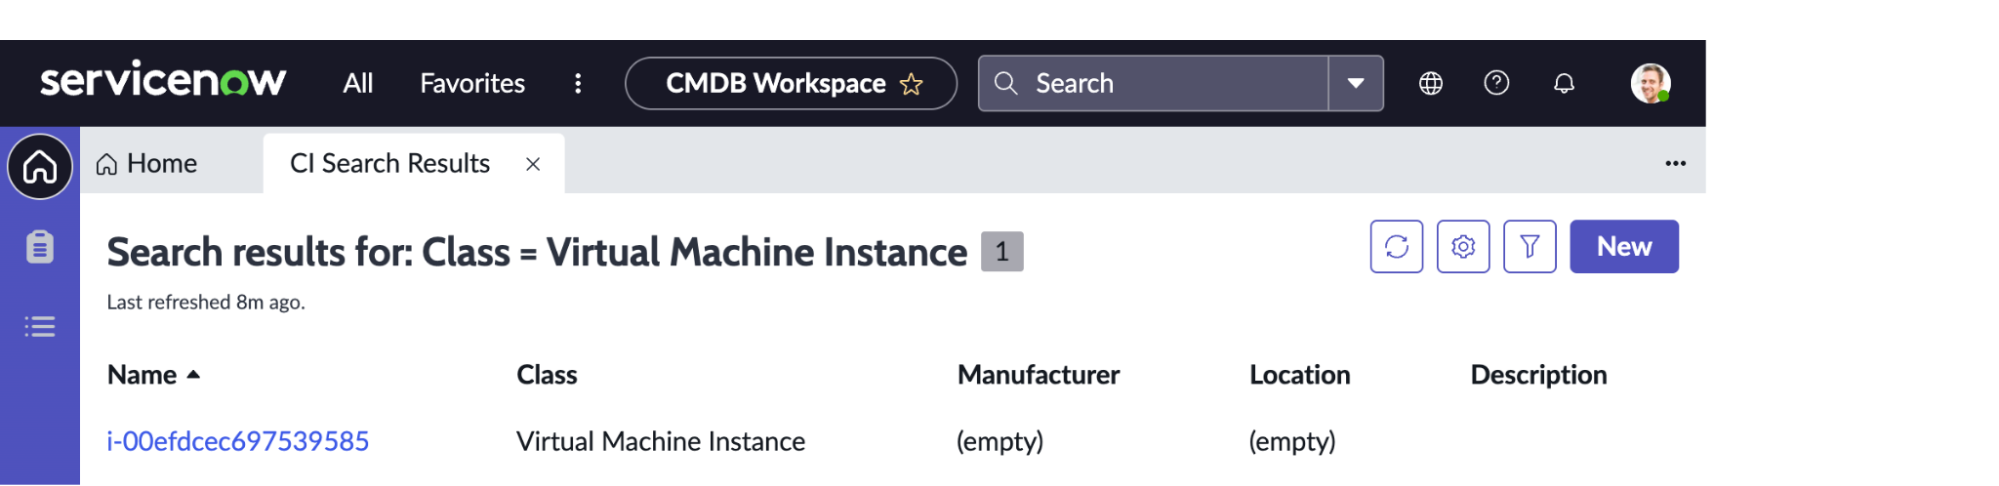 ServiceNow showing the search results for all Virtual Machine instances, showing a single virtual machine with an ID that matches the one created by Terraform